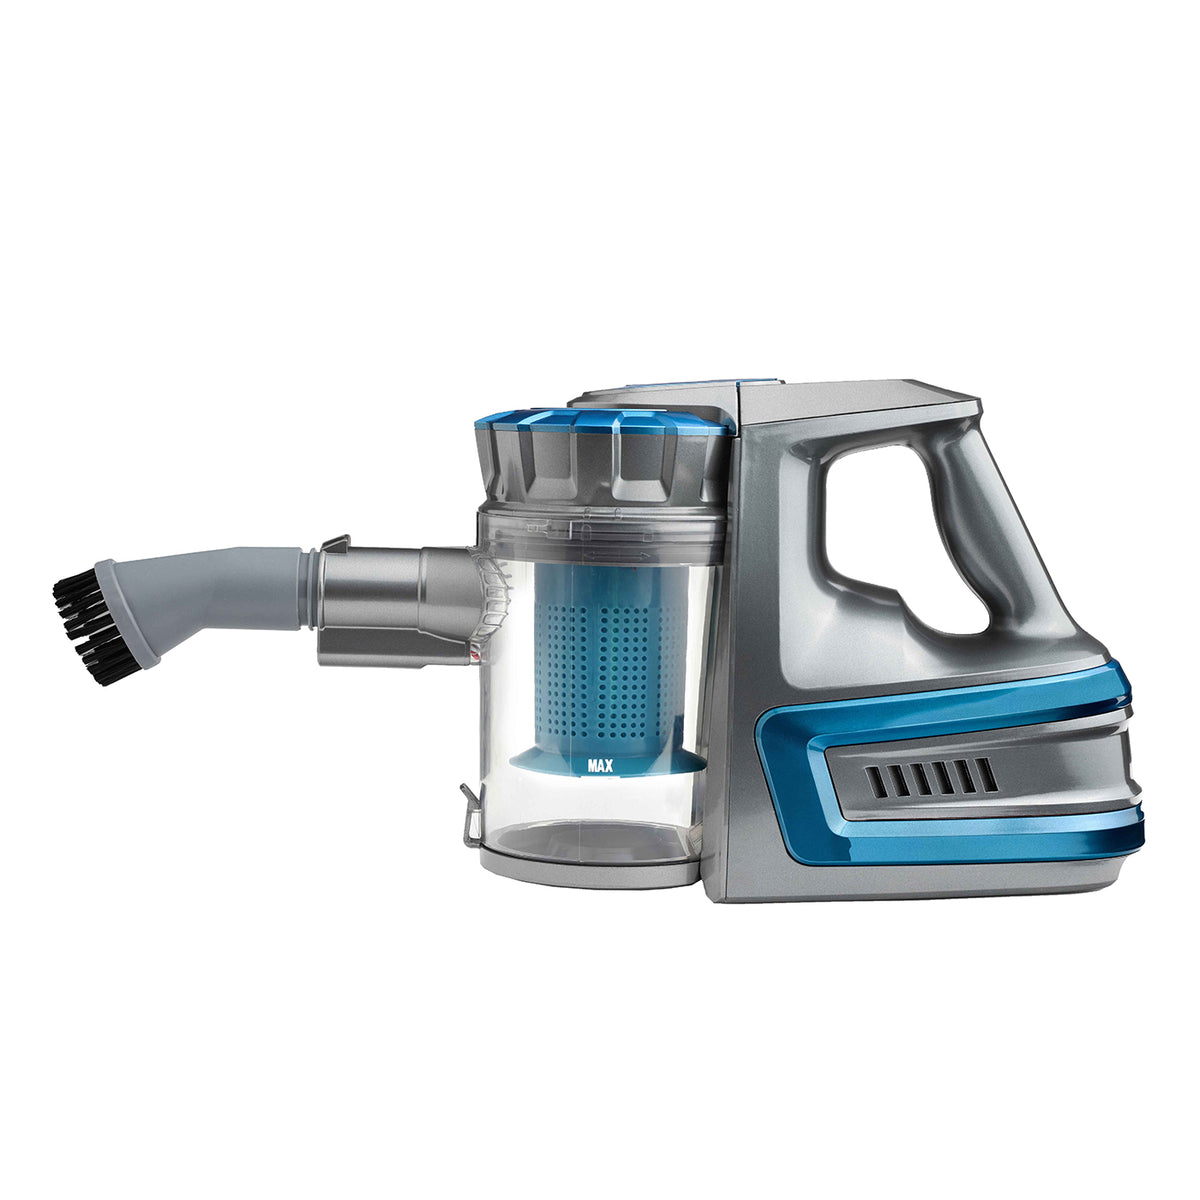 Rechargeable Hand-held Stick Cordless Vacuum Cleaner (Blue/Grey) 150W